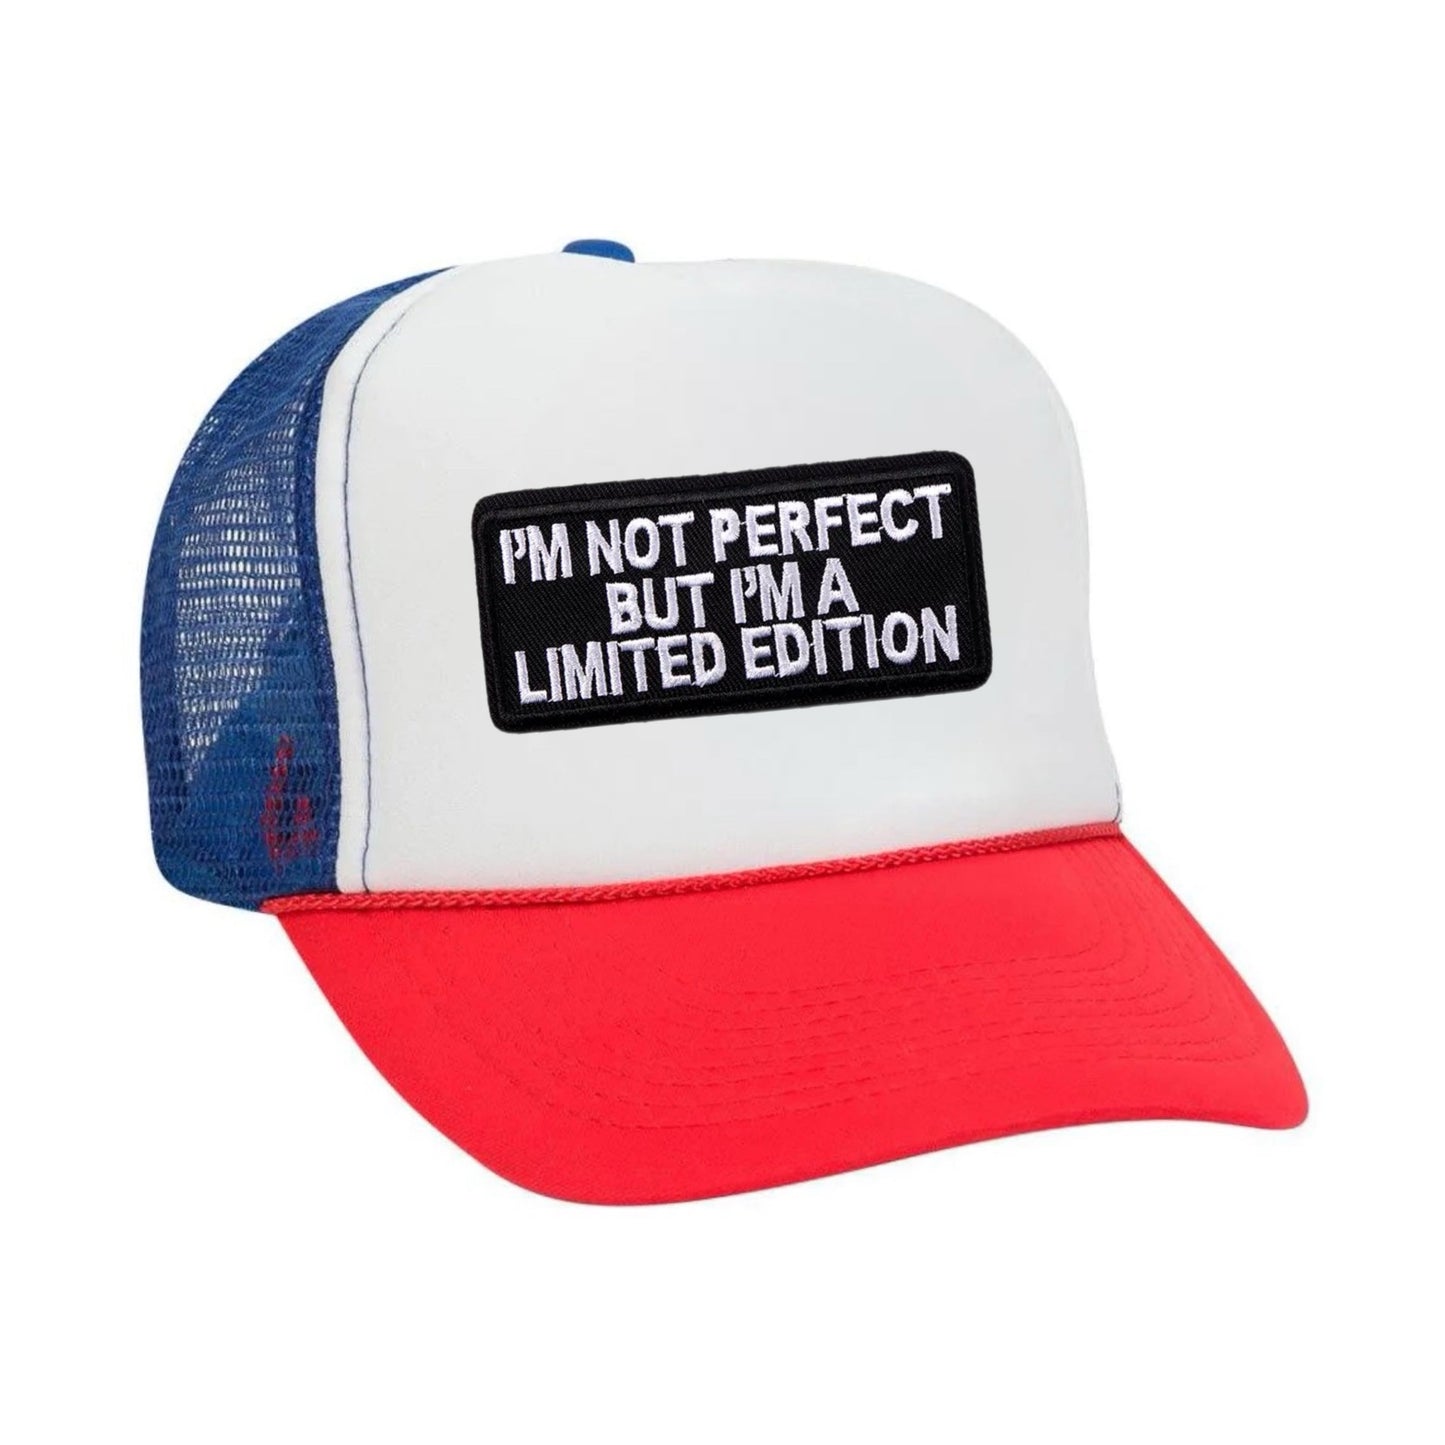 I'm Not Perfect  Snapback Hat - Red / White / Blue